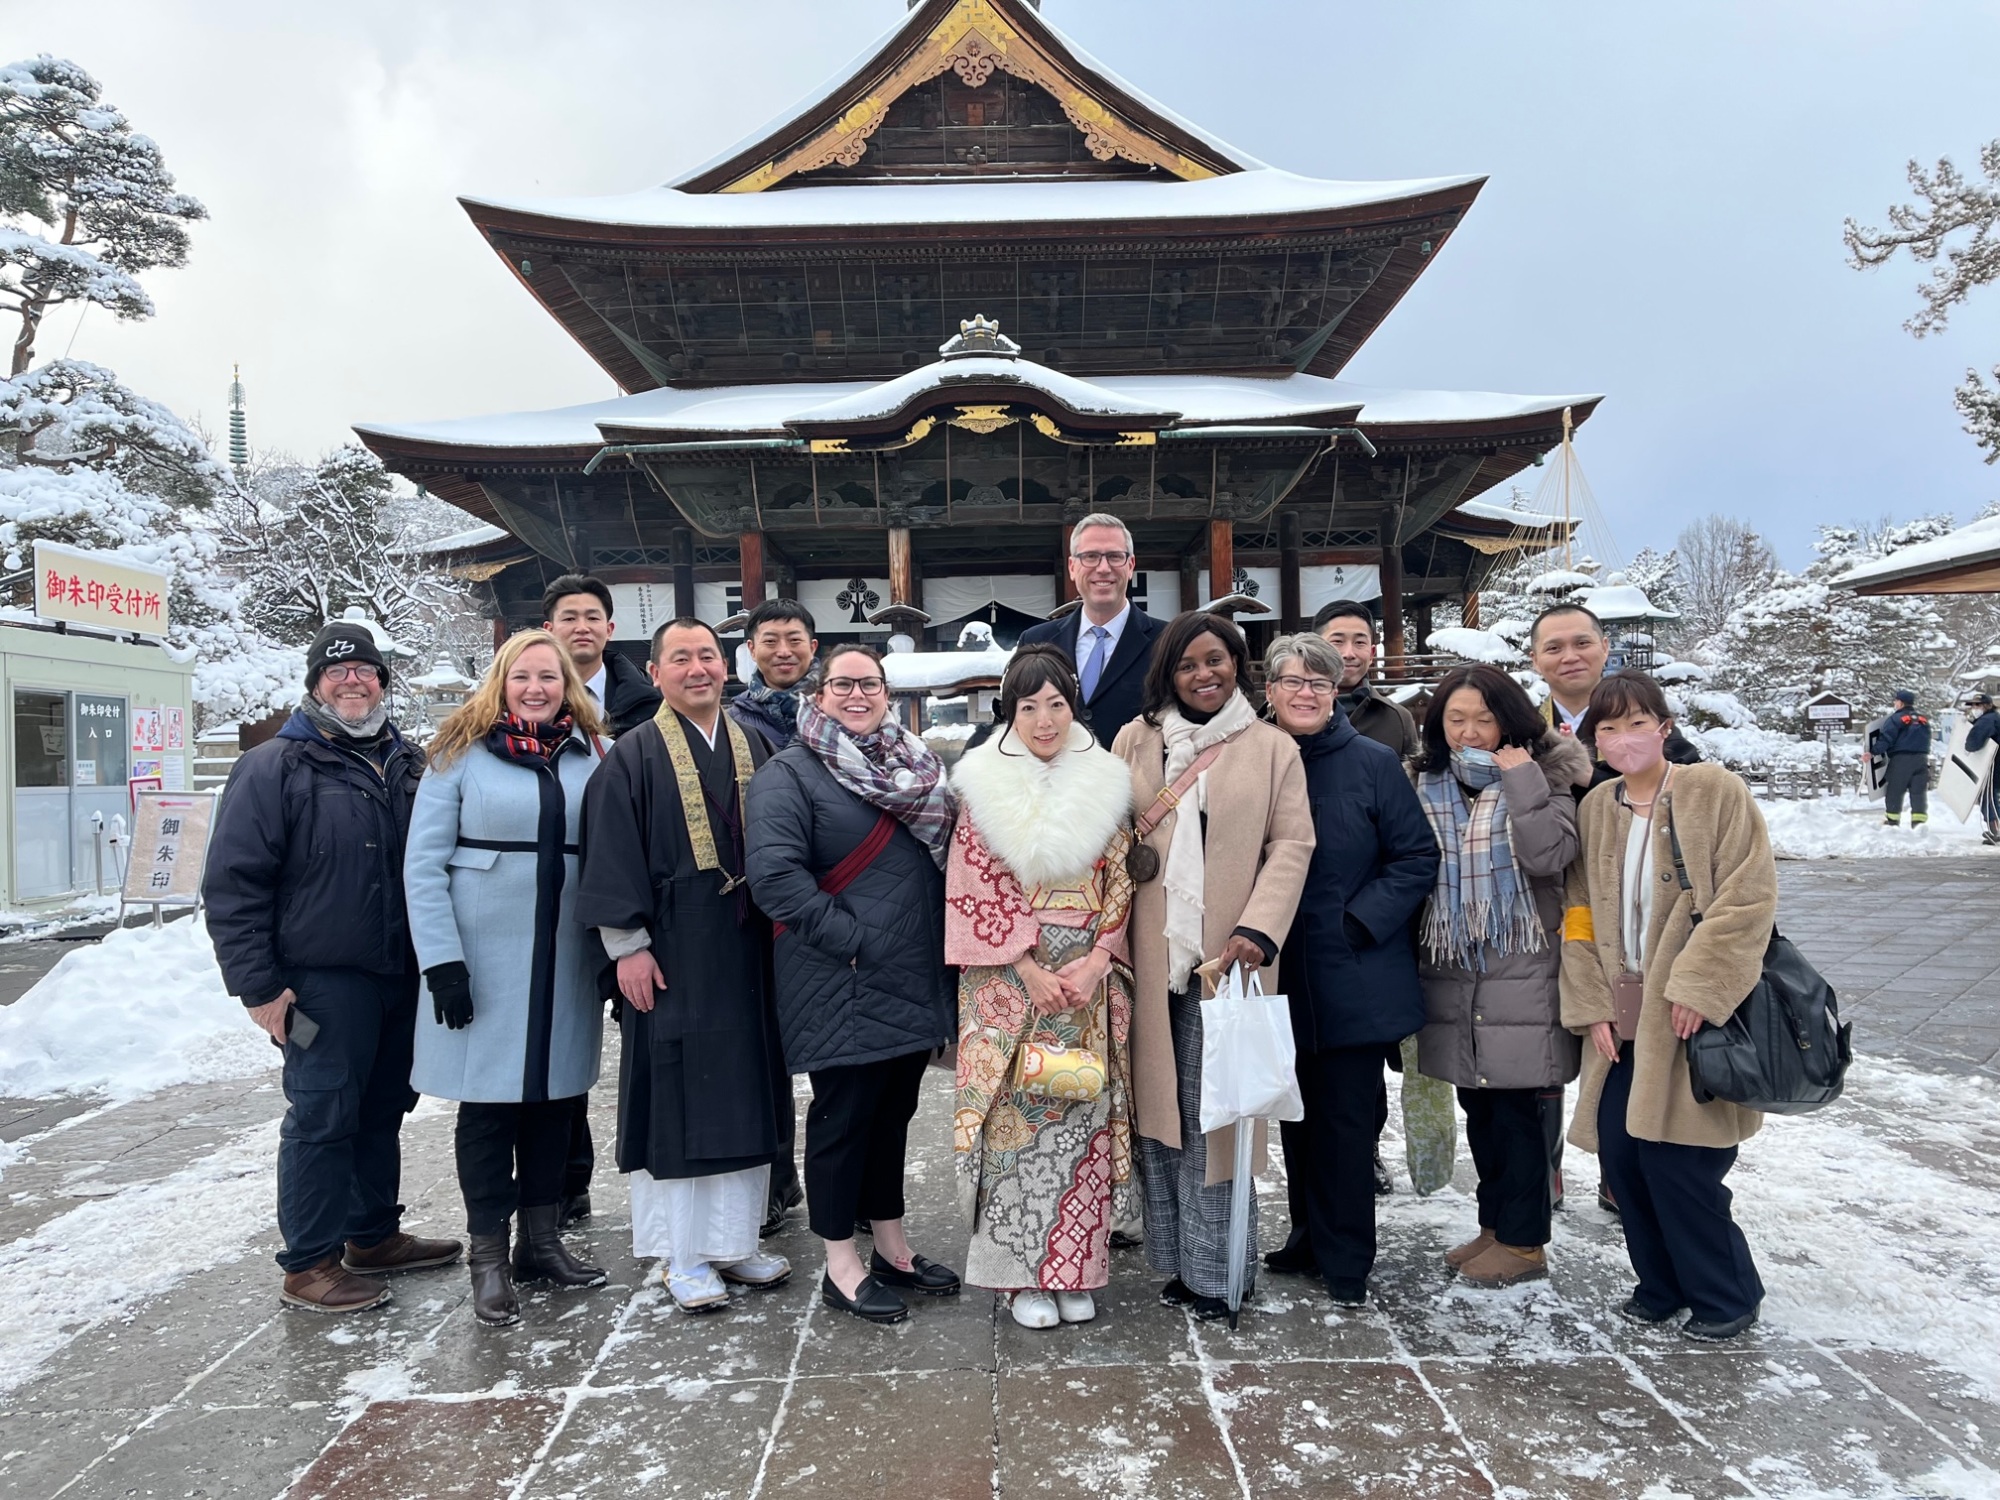 ACYPL delegates standing with Japanese leaders in front of a temple on a snowy, wintery day.